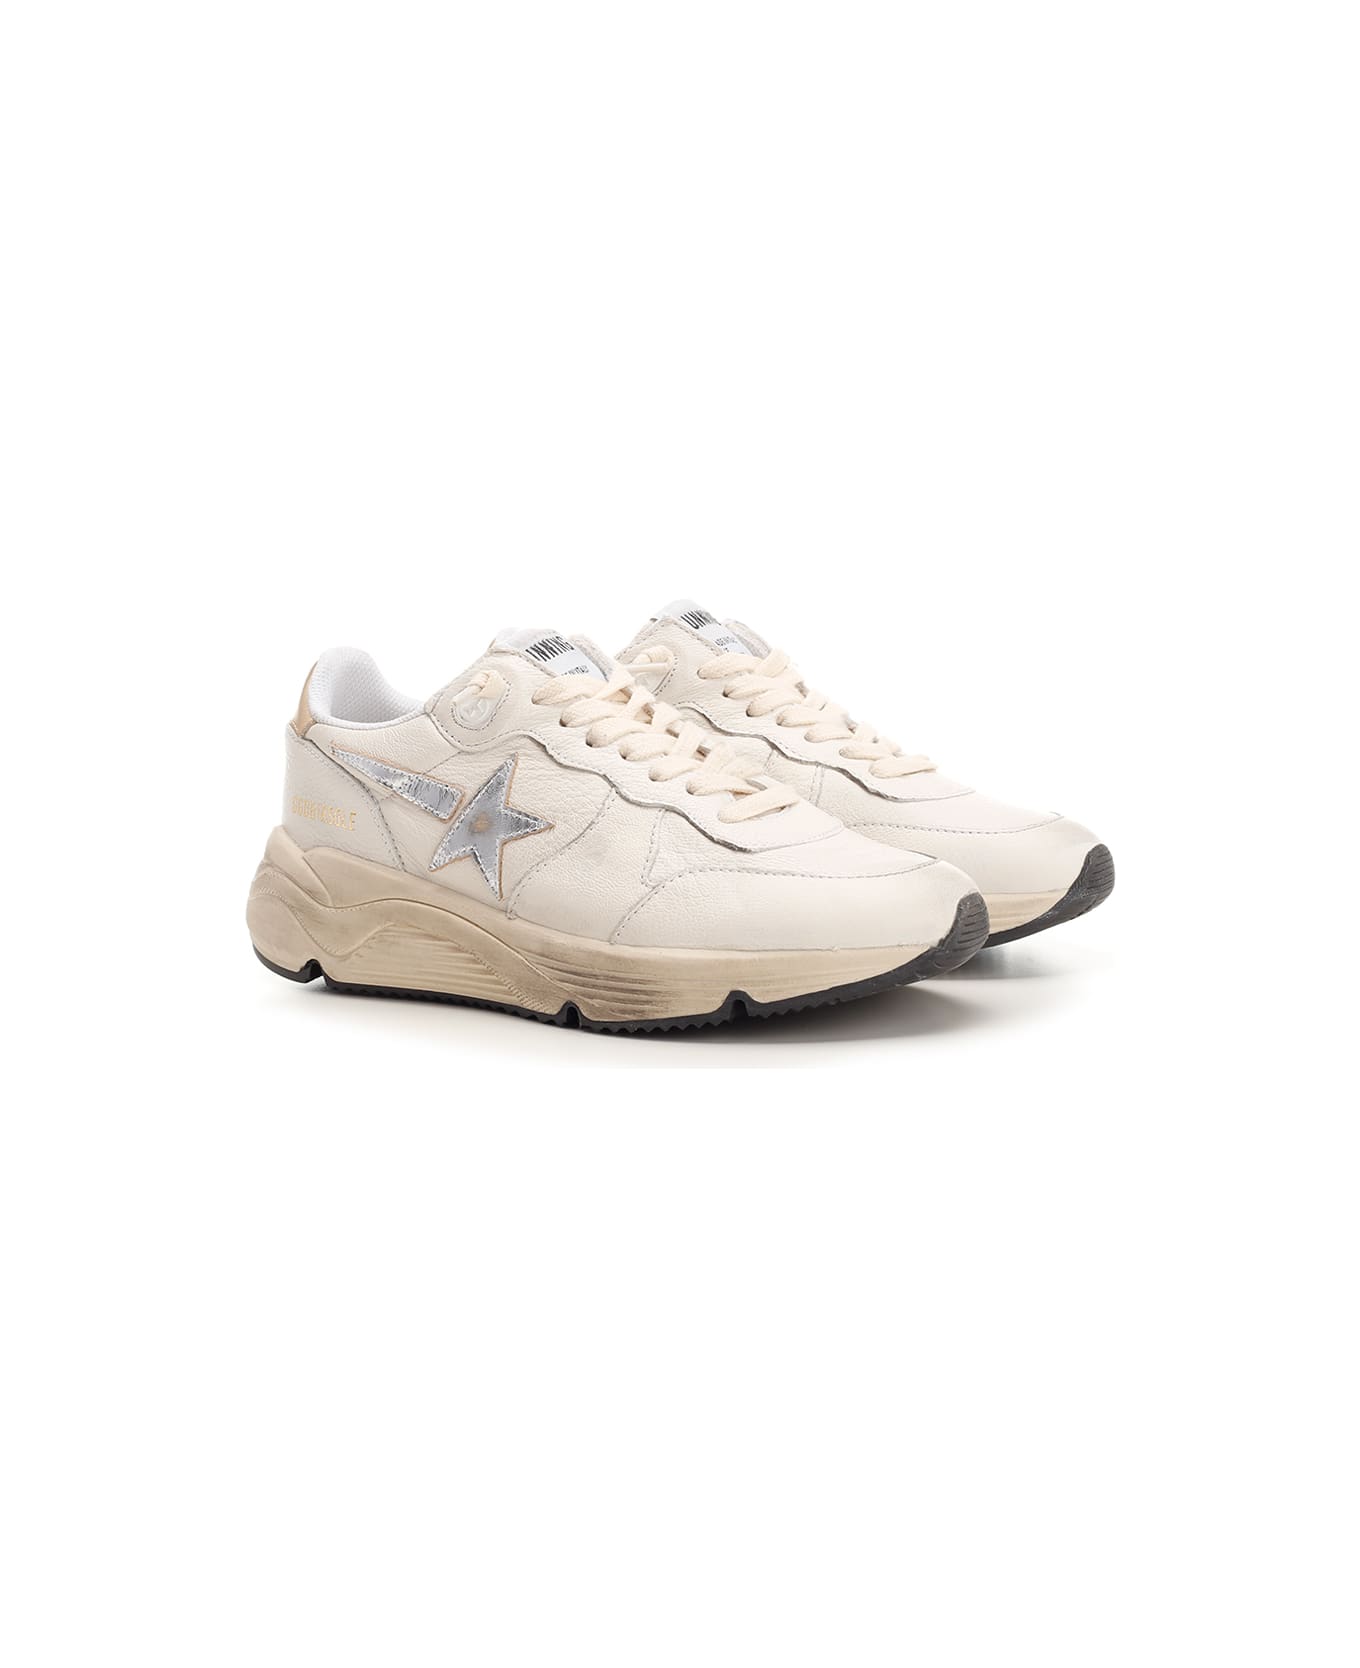 Golden Goose Running Sole Sneakers - White/Silver/Gold スニーカー